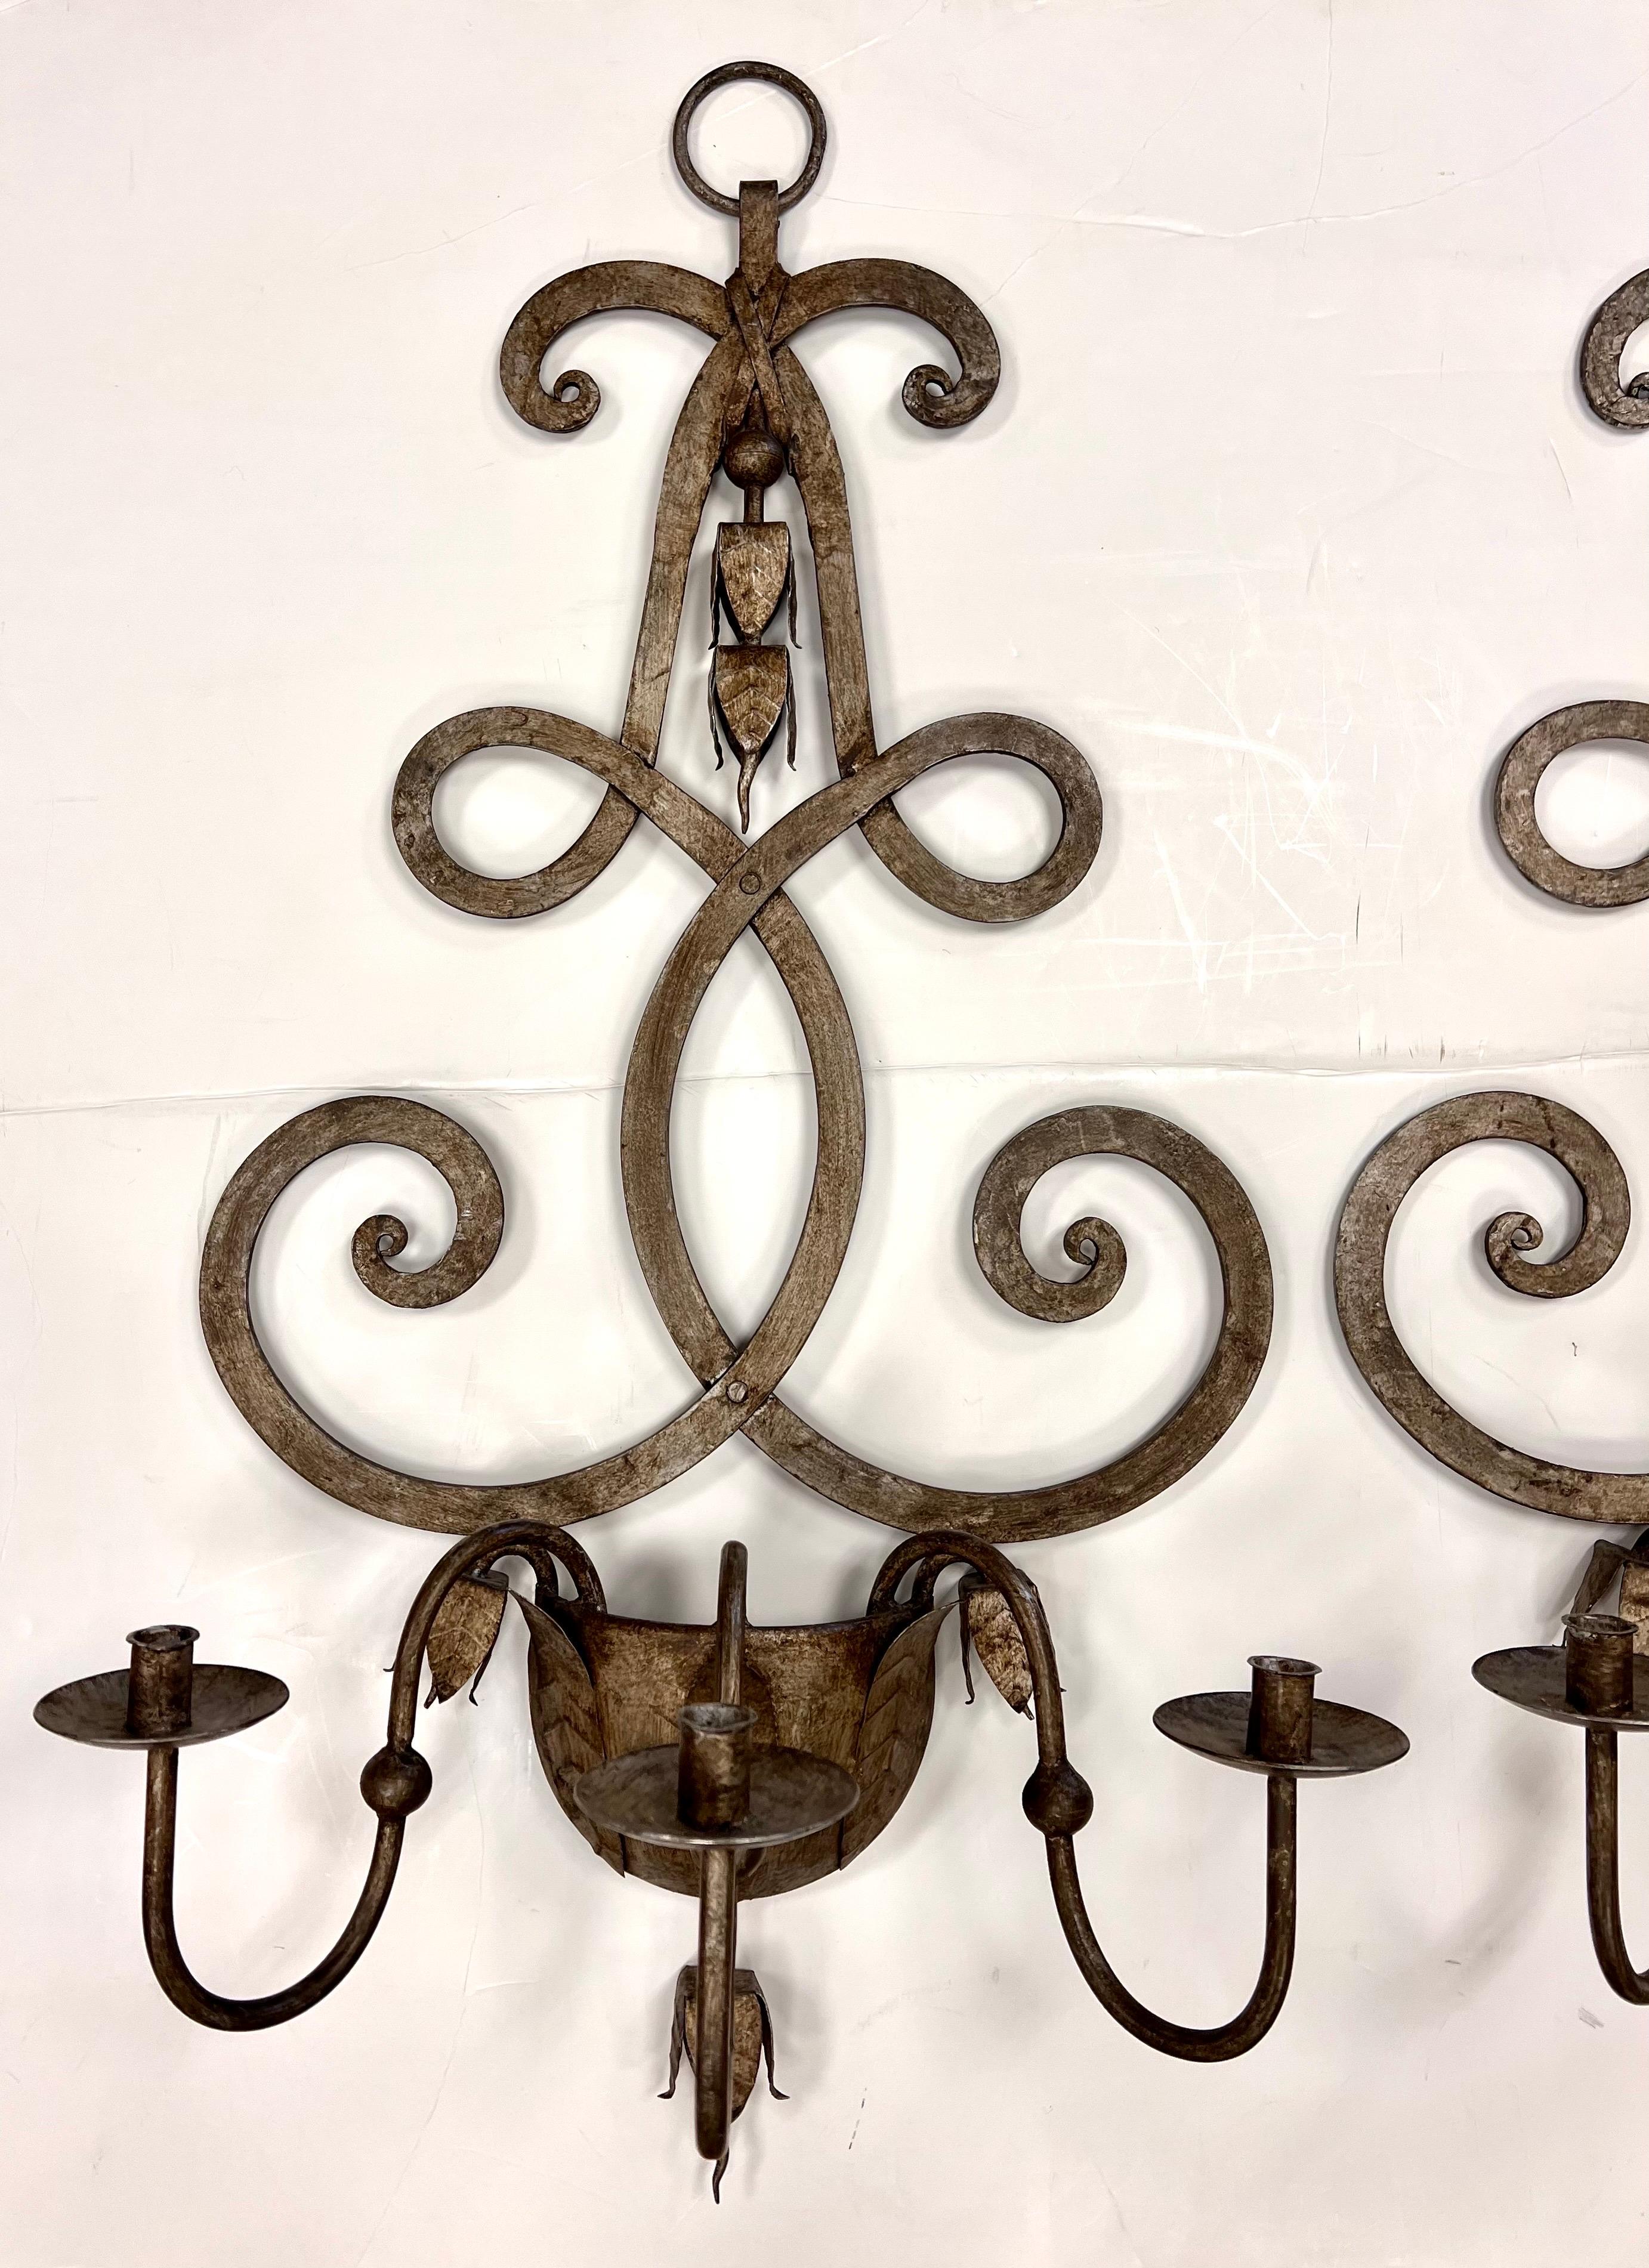 Bespoke, large pair of Florentine Rococo style metal candle sconces for wall decoration. Features intentional rustic patina and larger scale, see dimensions.
Unsigned. Gorgeous.